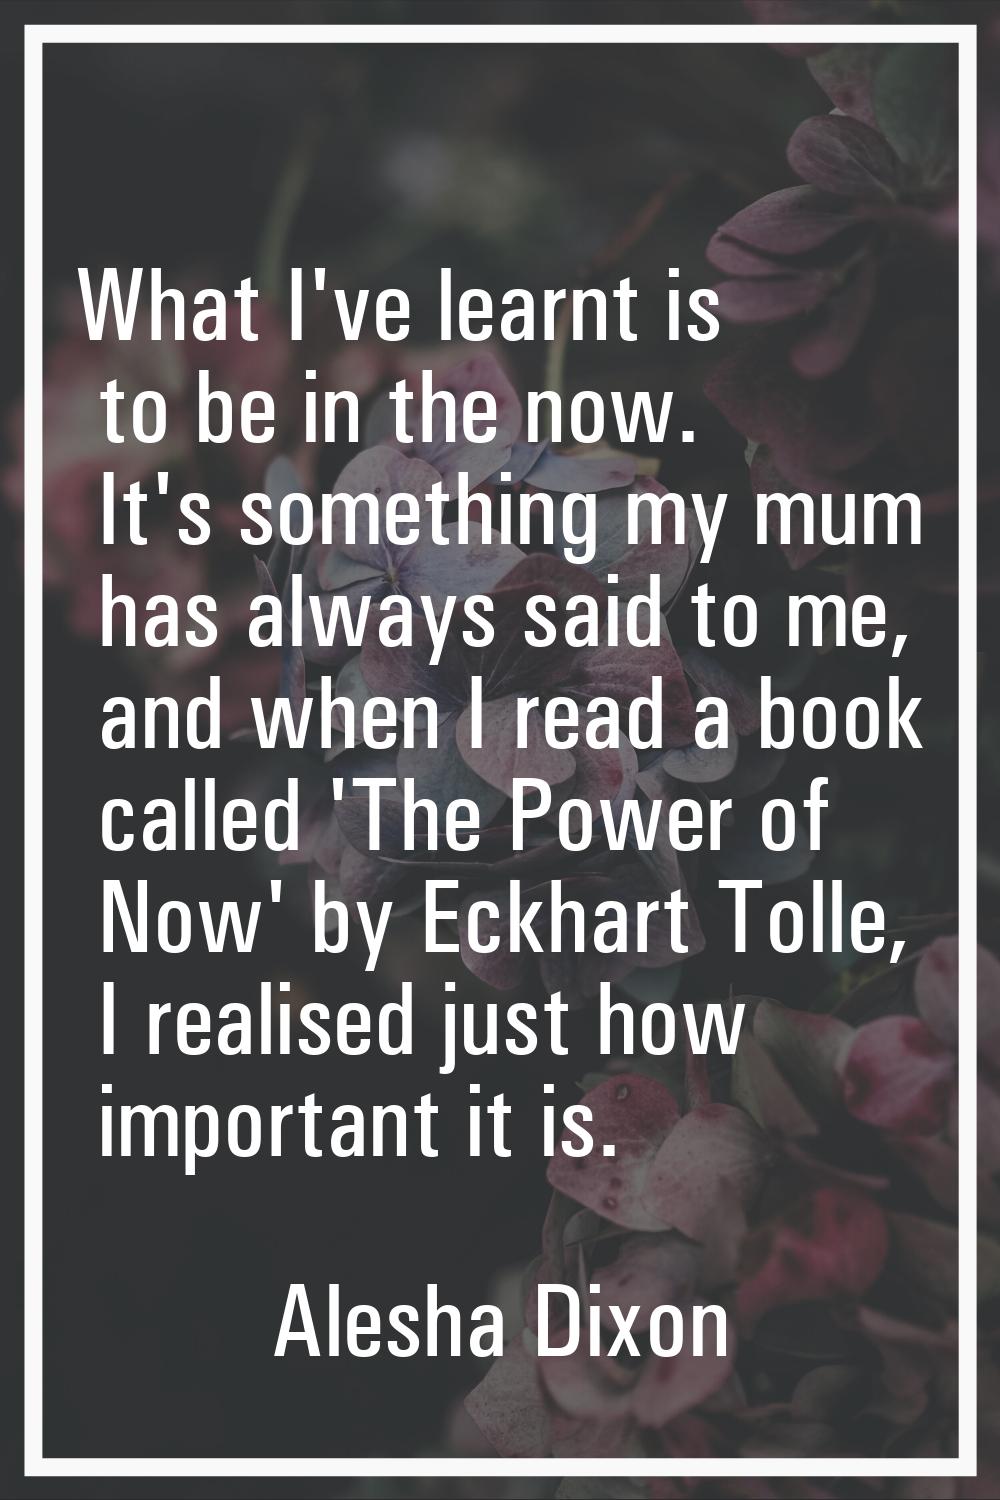 What I've learnt is to be in the now. It's something my mum has always said to me, and when I read 